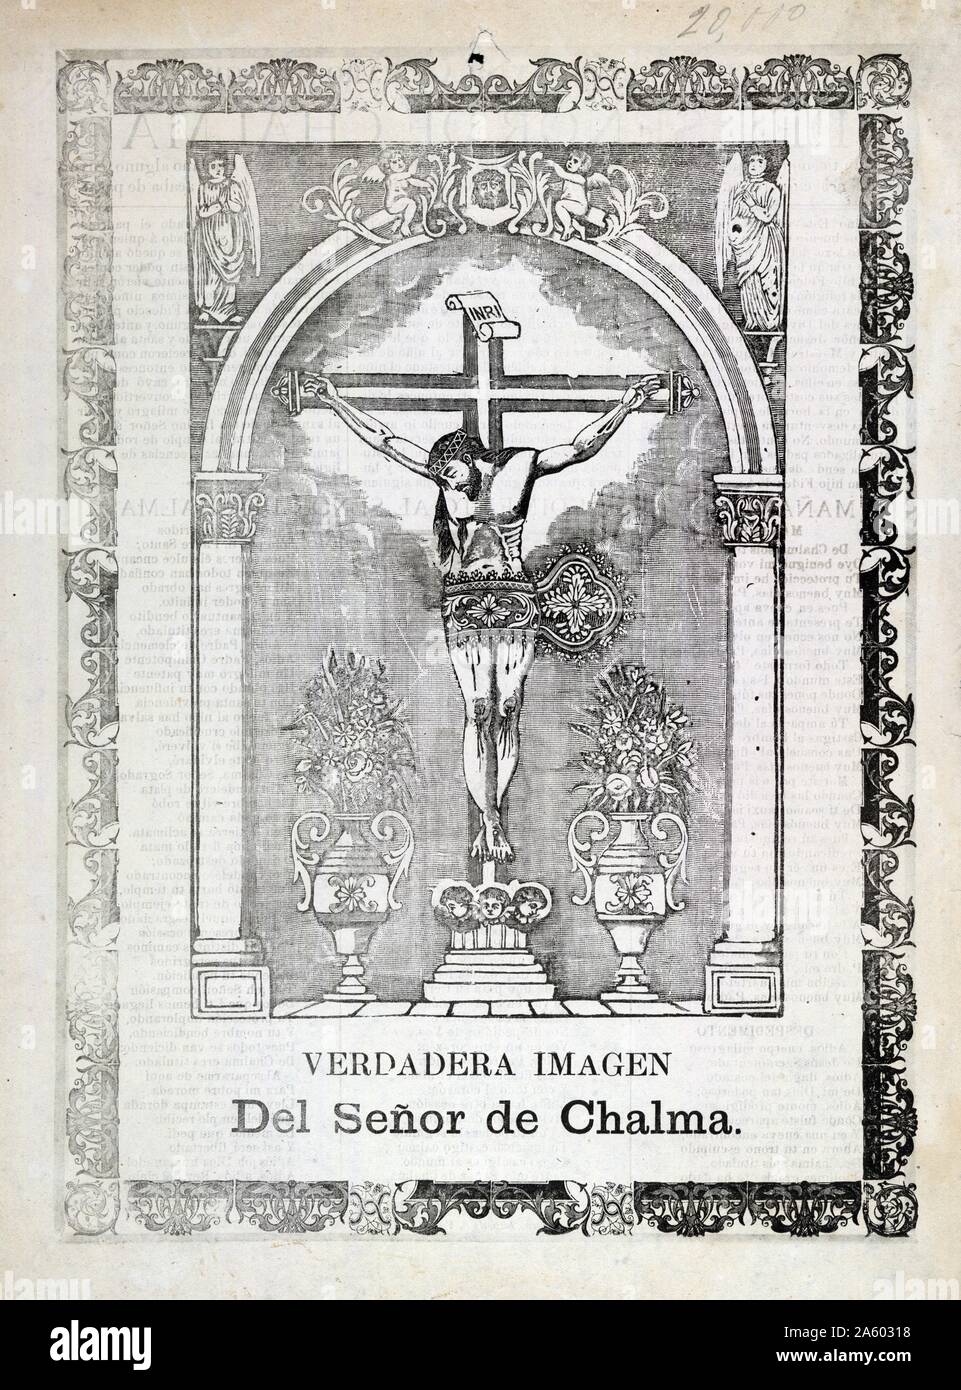 True image of the lord of Chalma by Jose Guadalupe (1852-1913). Print on cream ground wood paper : relief cuts, with text in letterpress. Broadside shows a statue of the crucified Christ. On the verso, accompanying text describes a miracle performed by the Lord of Chalma. Fidencio's father, Regino Esteves, ad lost his faith in Catholicism and had become a Protestant. When he found his son praying to the Lord of Chalma, he threw him into a hot stove. The text says that despite this tragedy, the child recovered. As a witness to this miracle the father converted back to Catholicism. Stock Photo